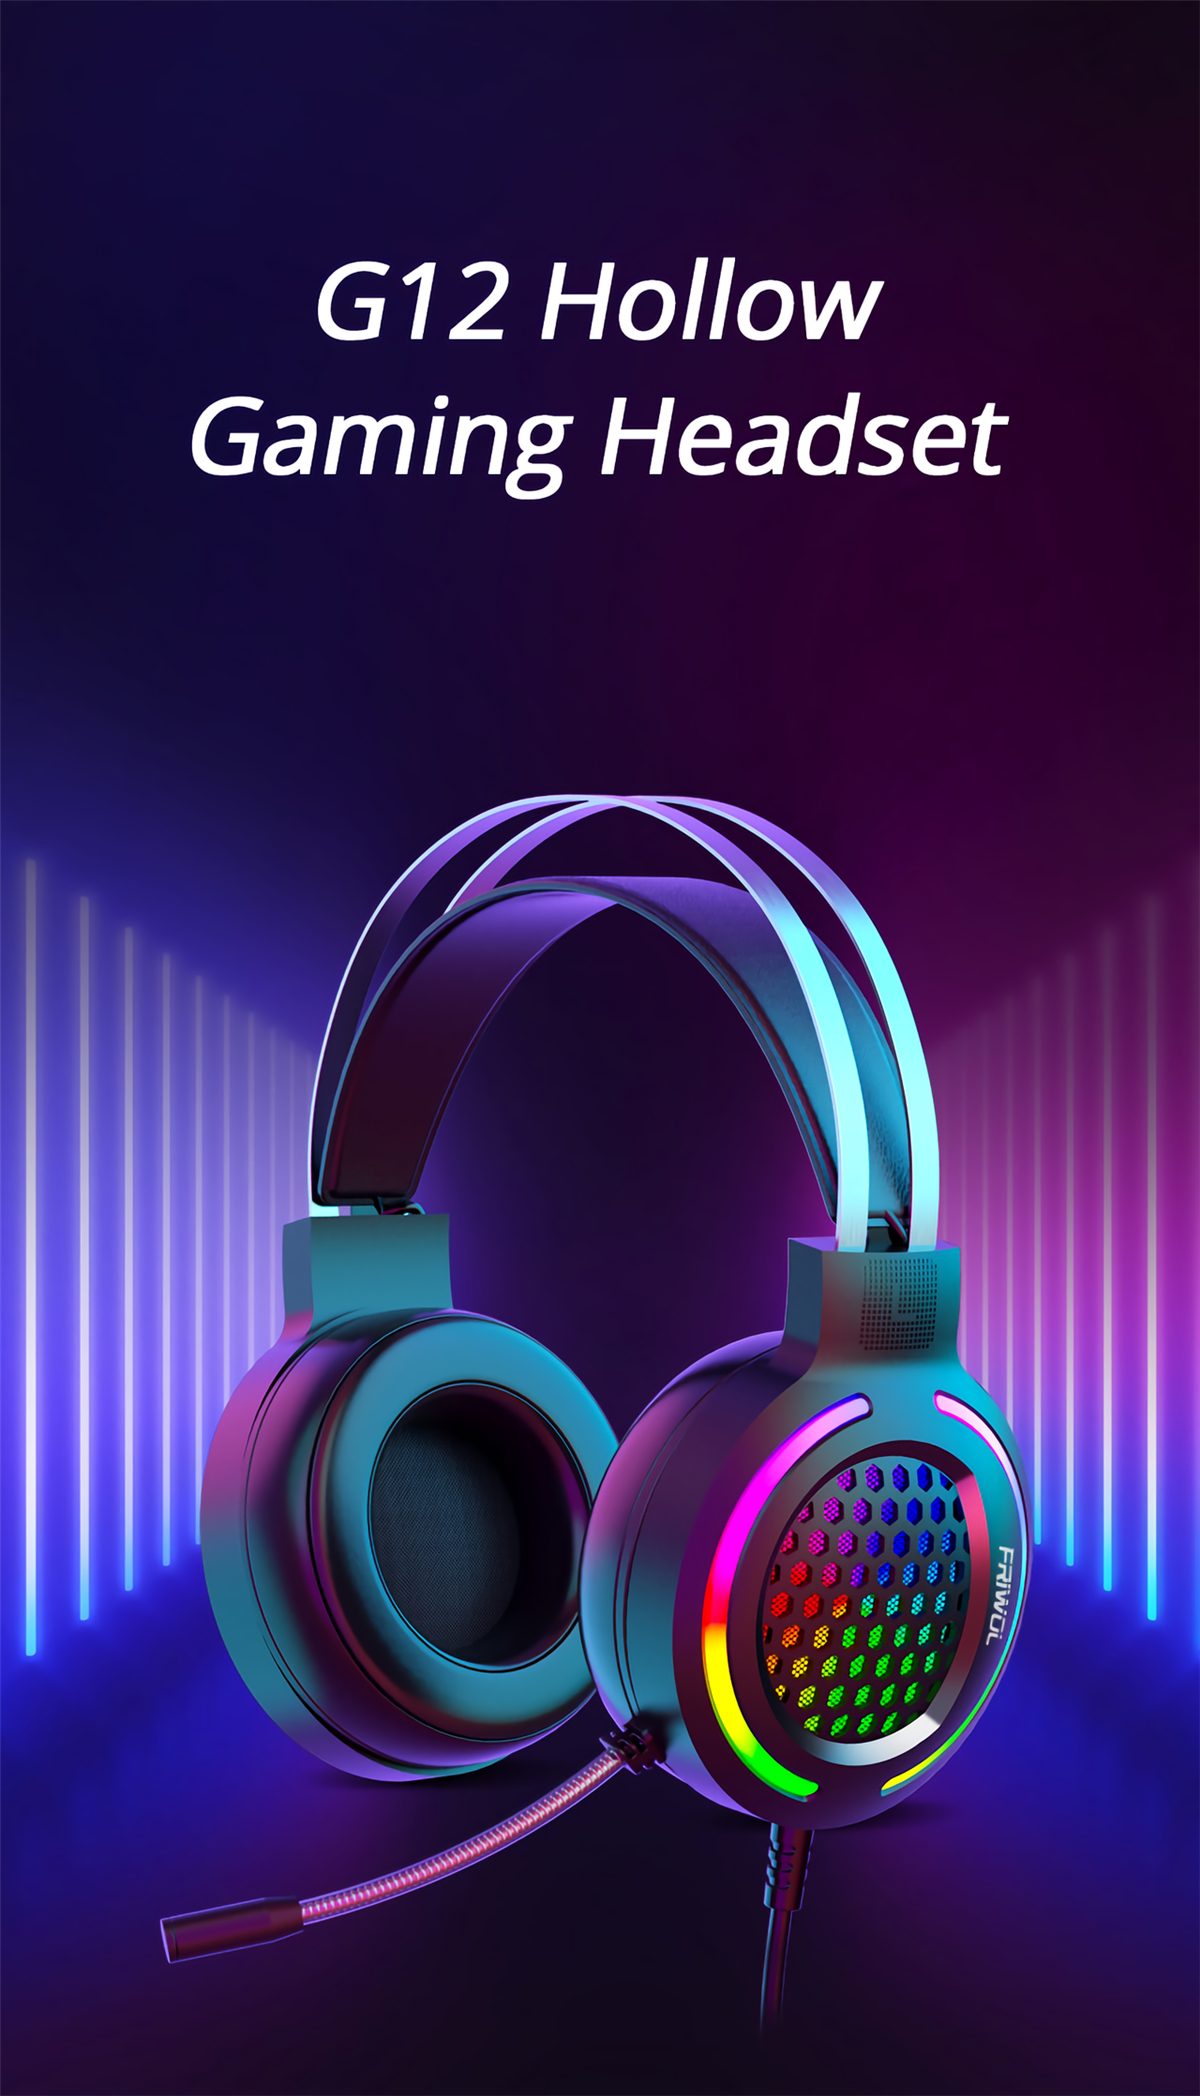 G12-Wired-Gaming-Headphone-71-Channel-50mm-Driver-USB-Wired-LED-Light-Honeycomb-Hollow-Gamer-Headset-1864239-1